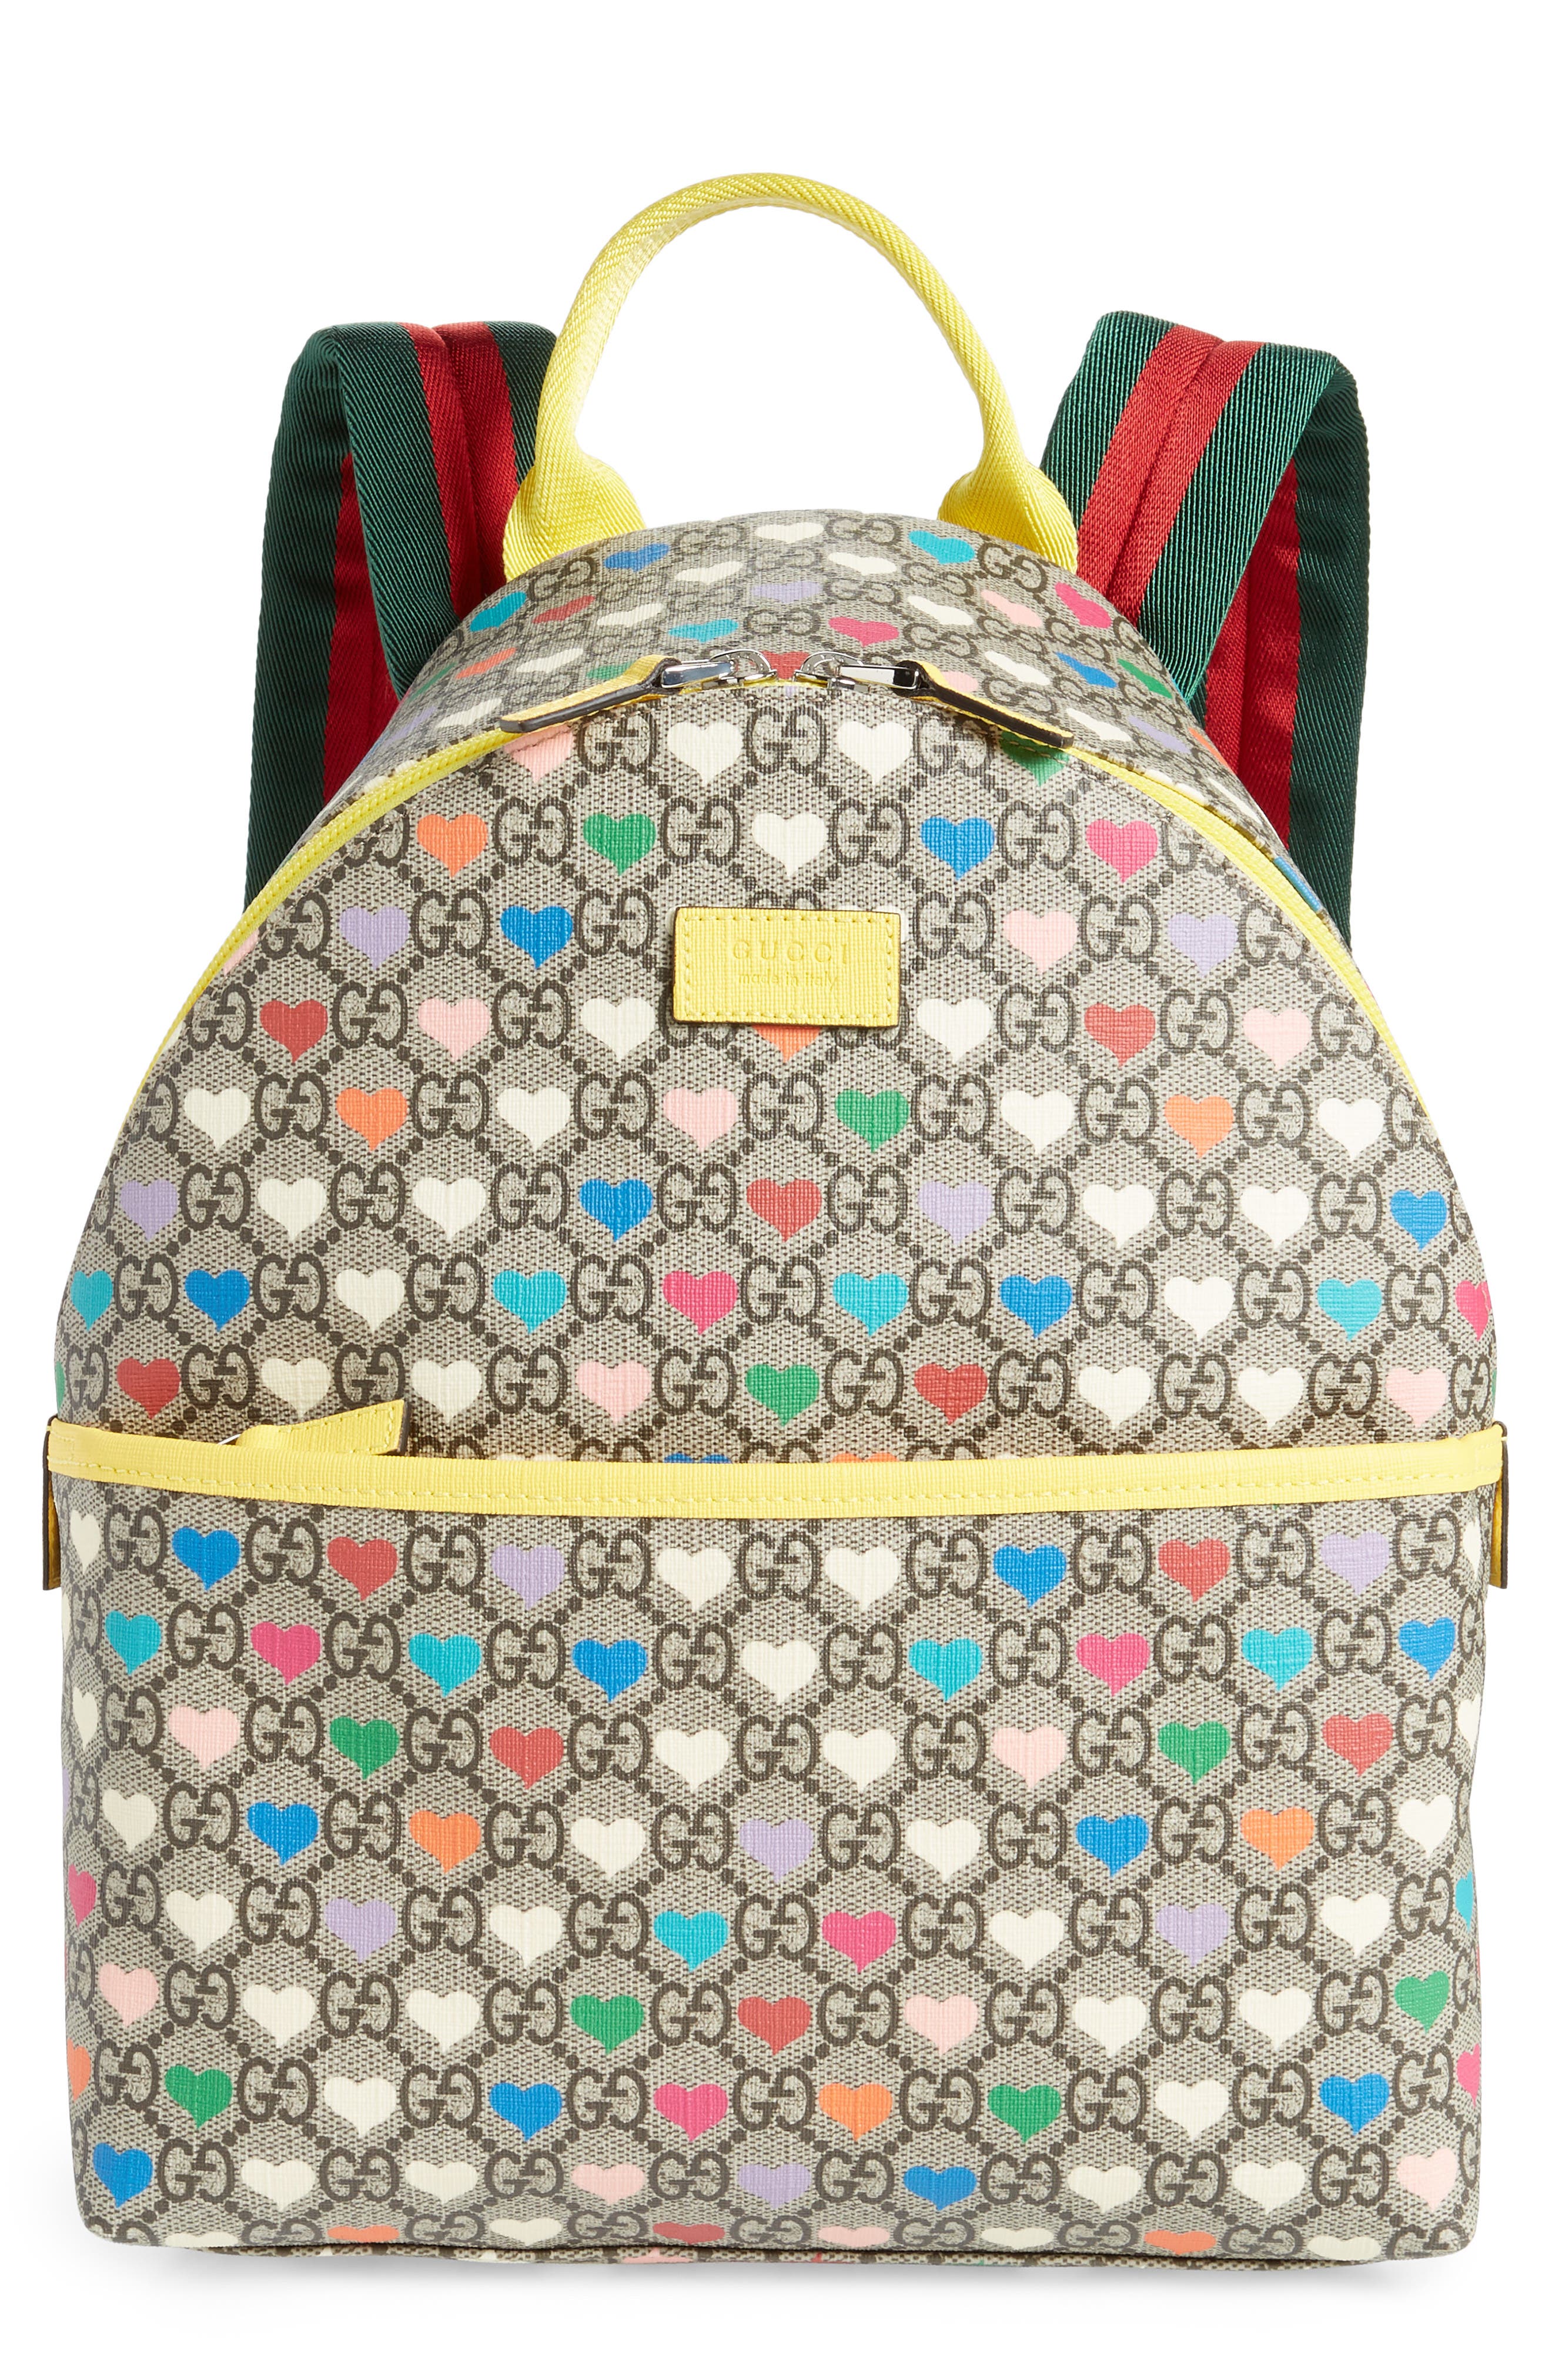 Gucci Book Bags For Kids Deals, 56% OFF 